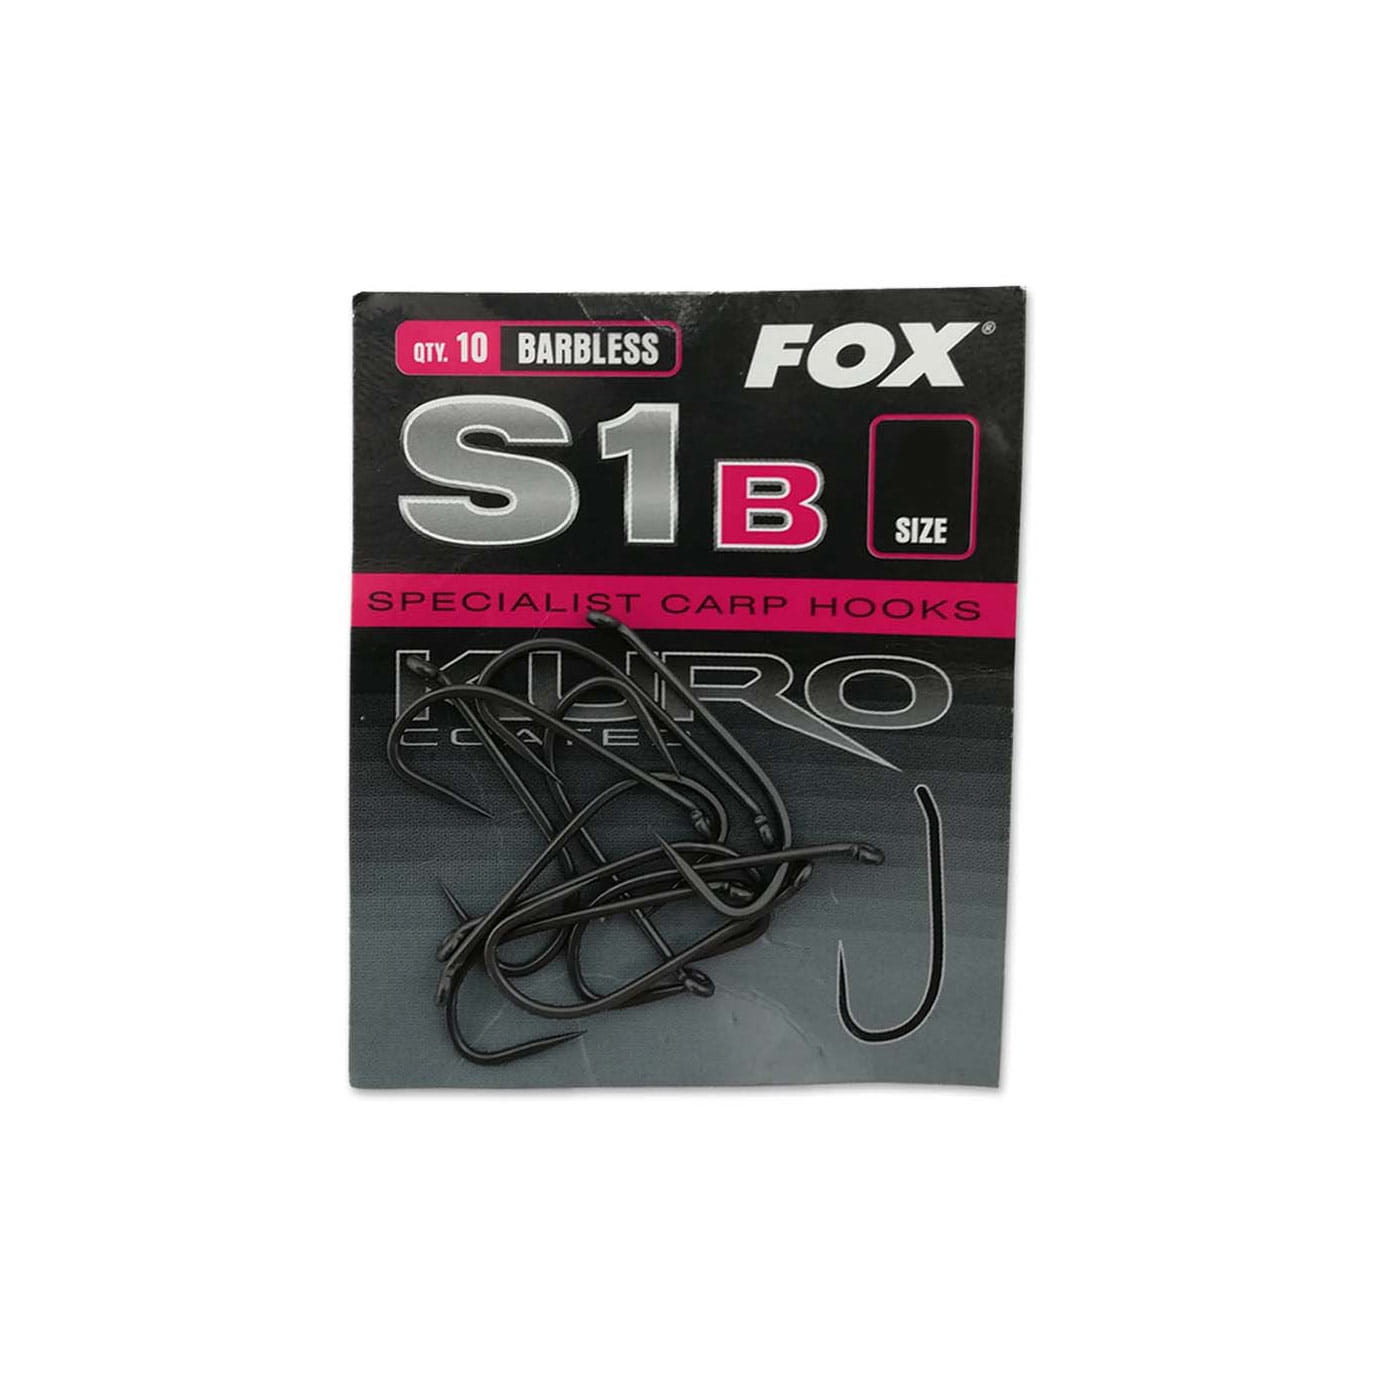 Fox S1 Kuro hook size 8 Barbless pack of 10, 8th